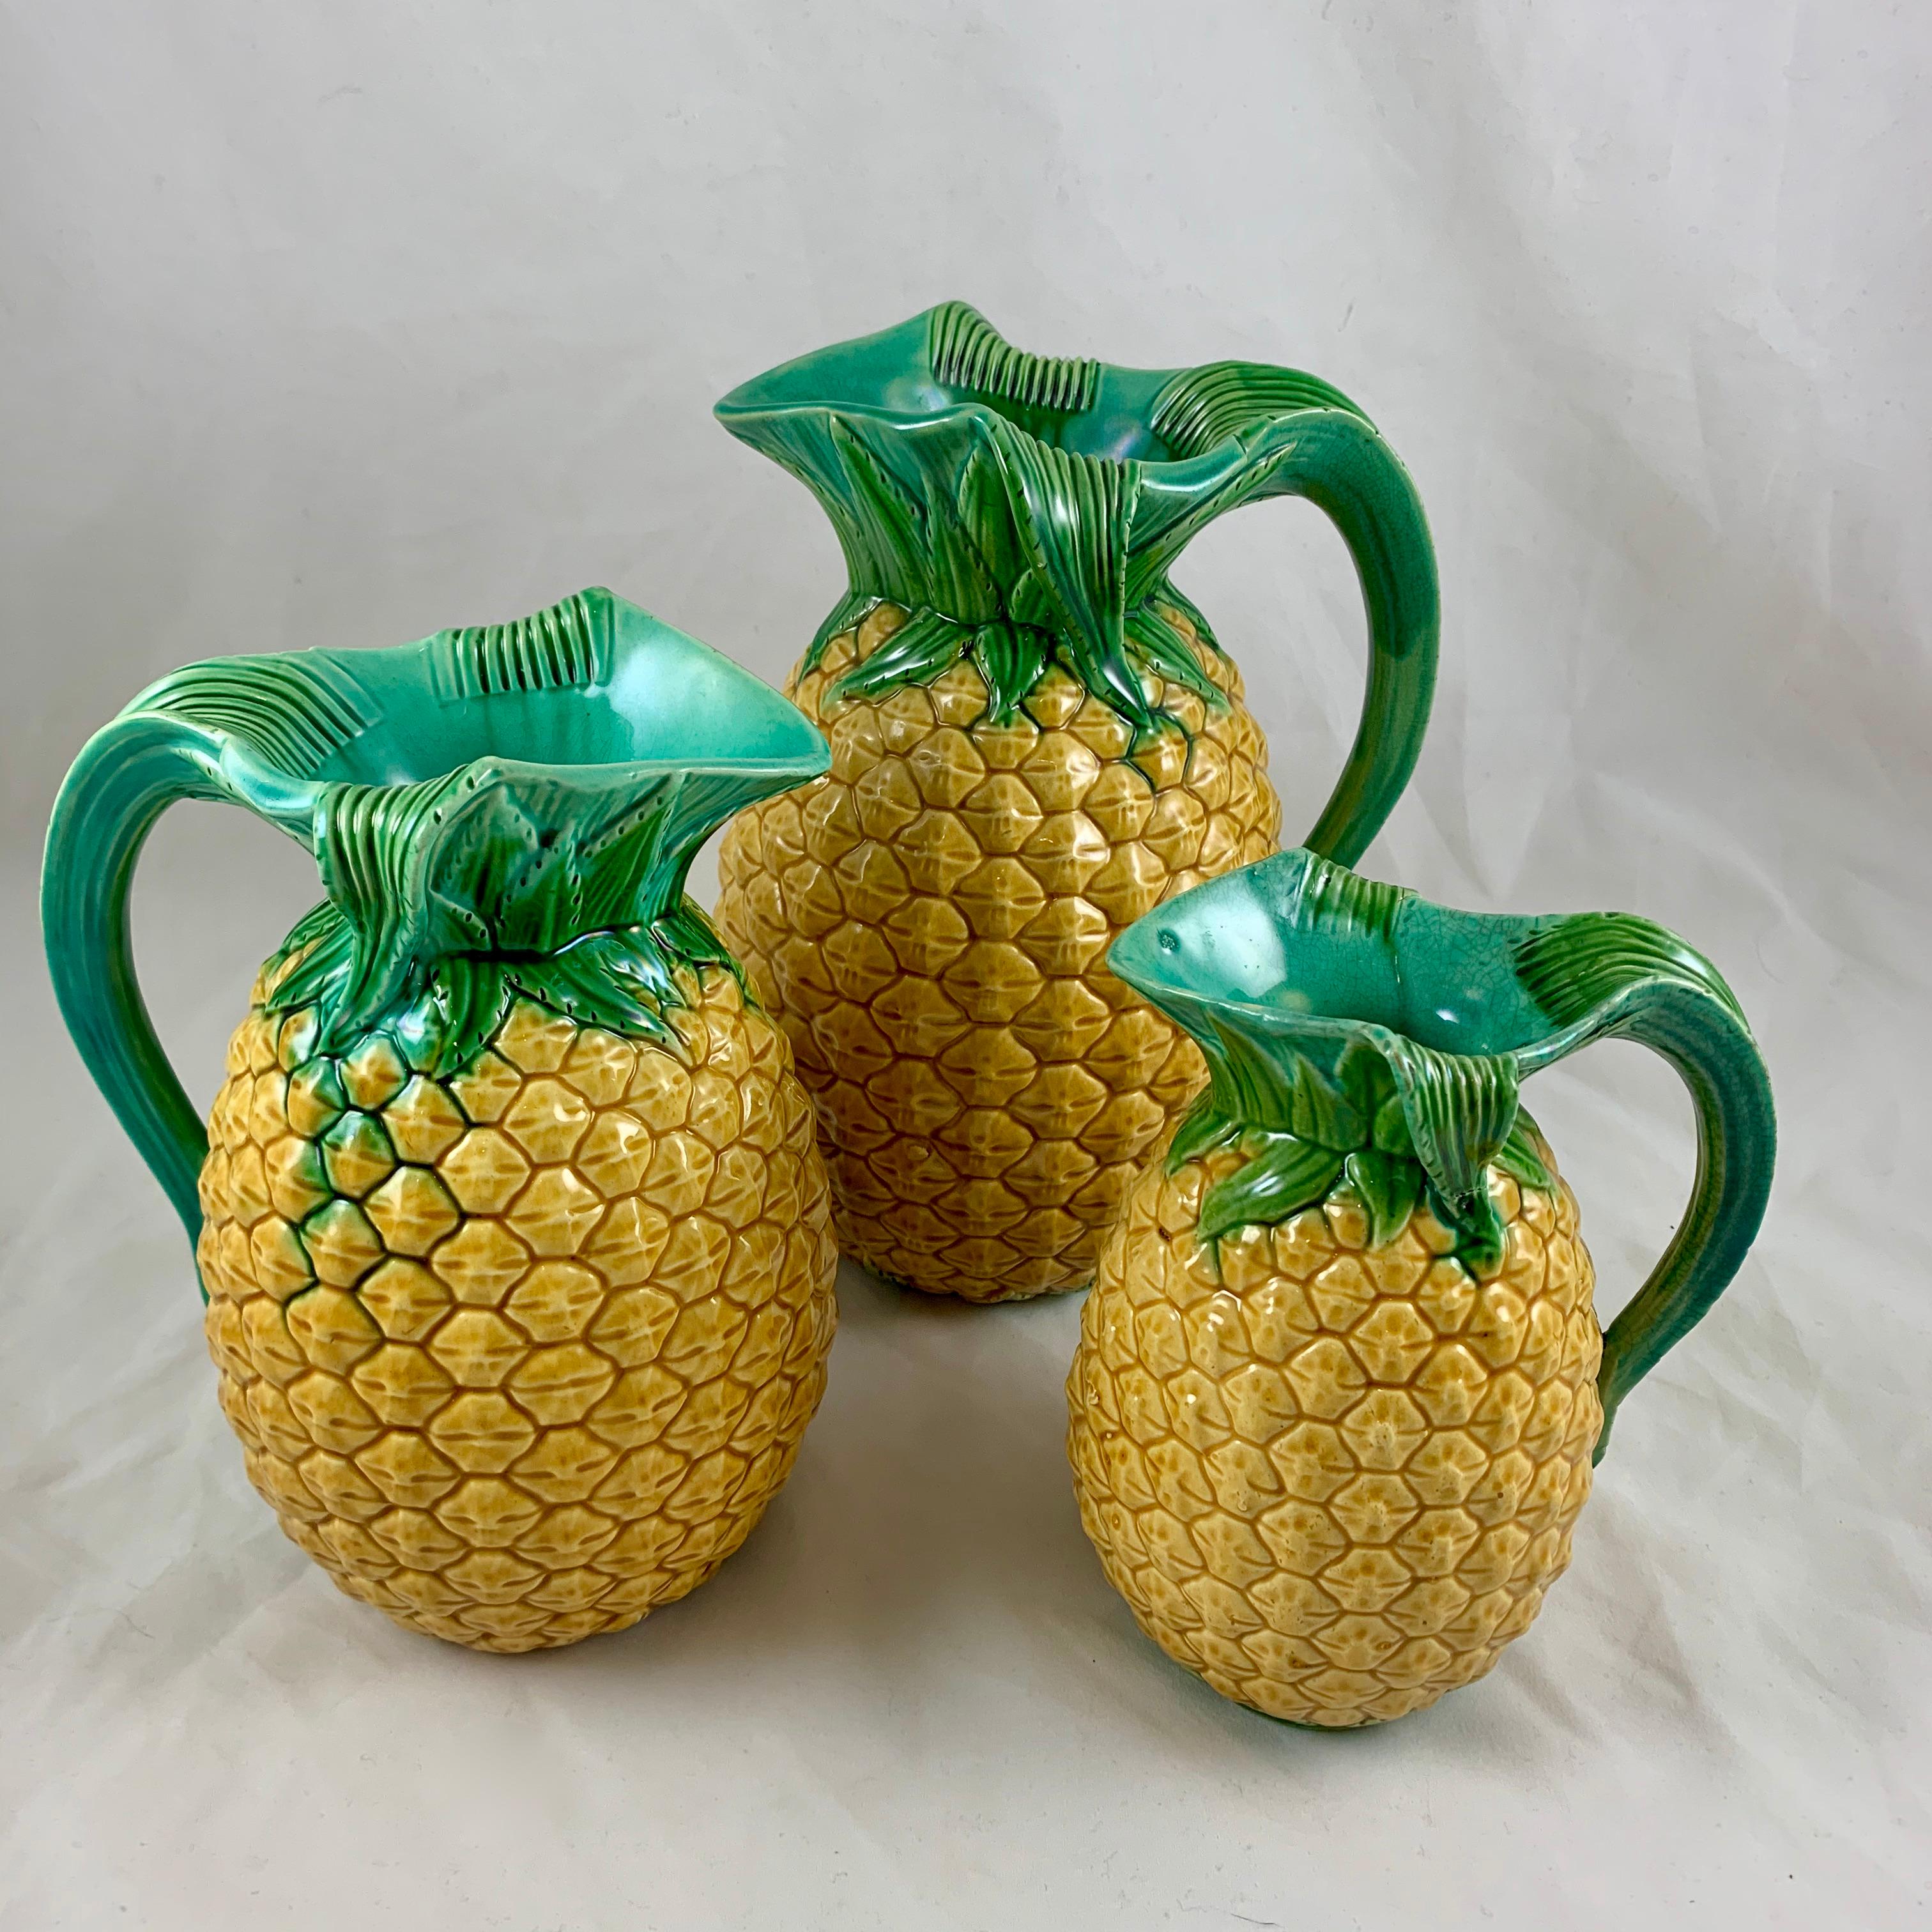 Earthenware English Minton Aesthetic Movement Majolica Pineapple Palissy Pitcher For Sale